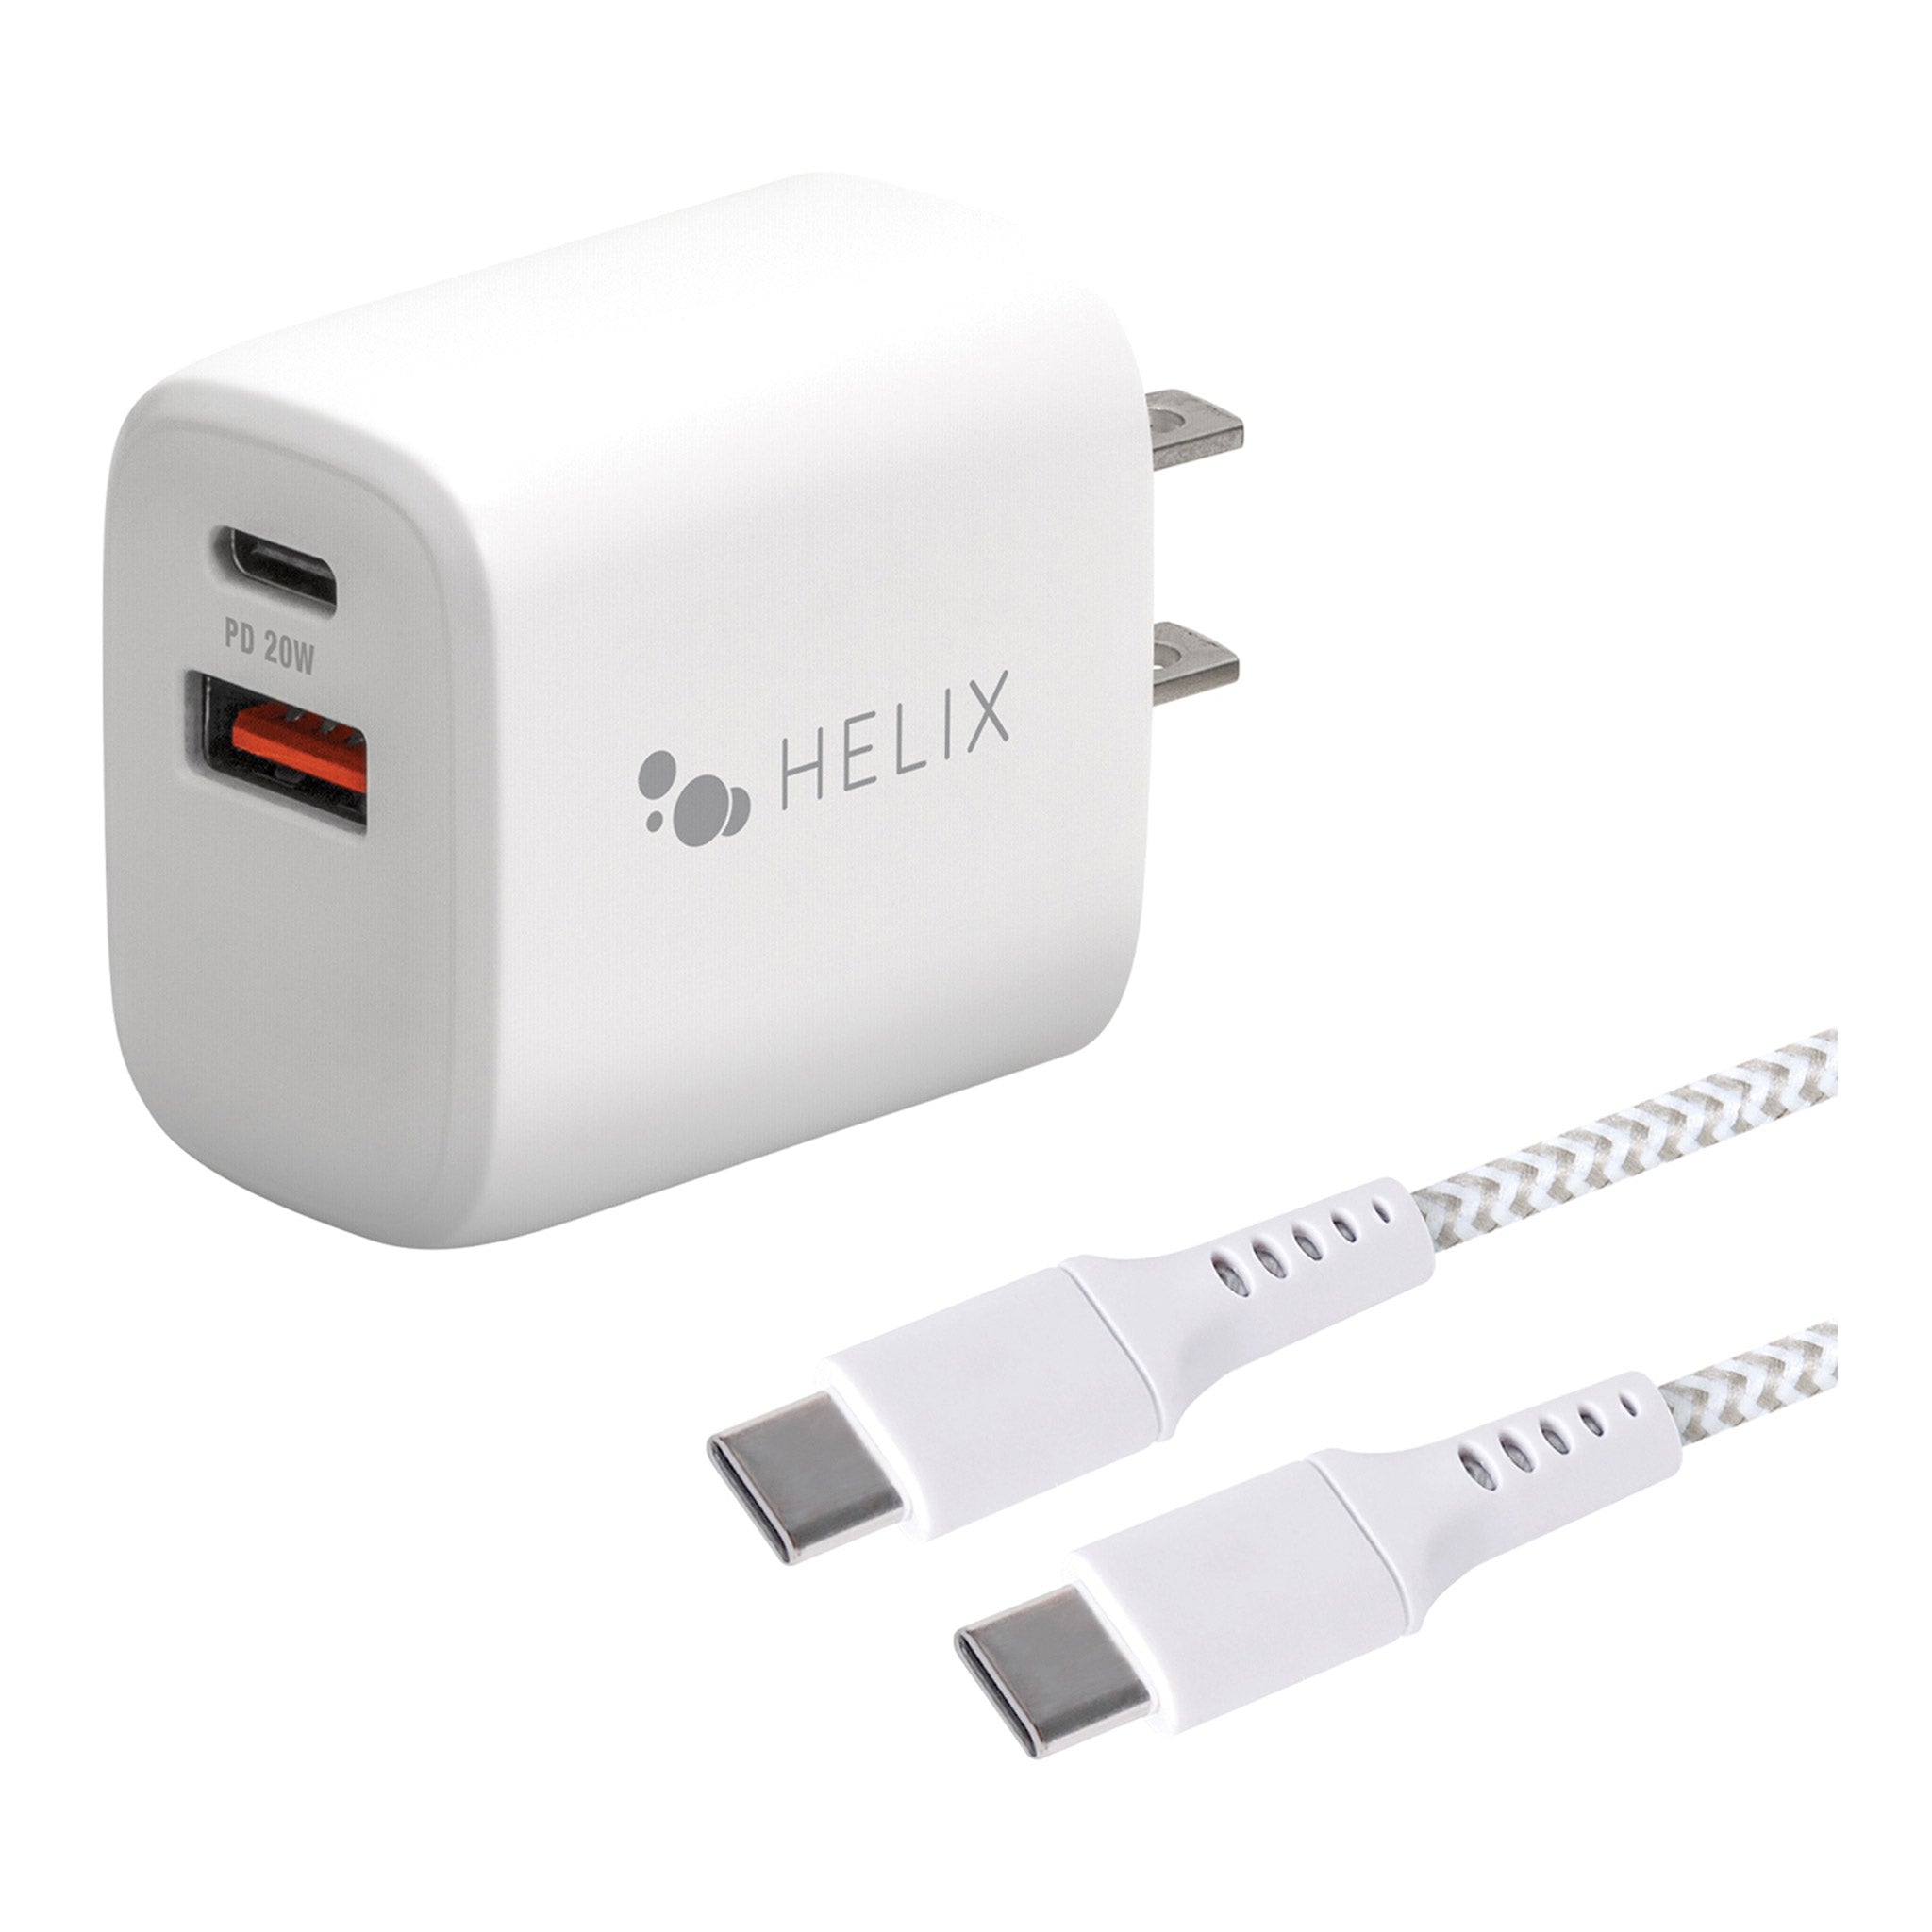 Helix ETHNBC20C 20W 2-Port USB Power Delivery Wall Charger and 5ft Braided USB-C Cable